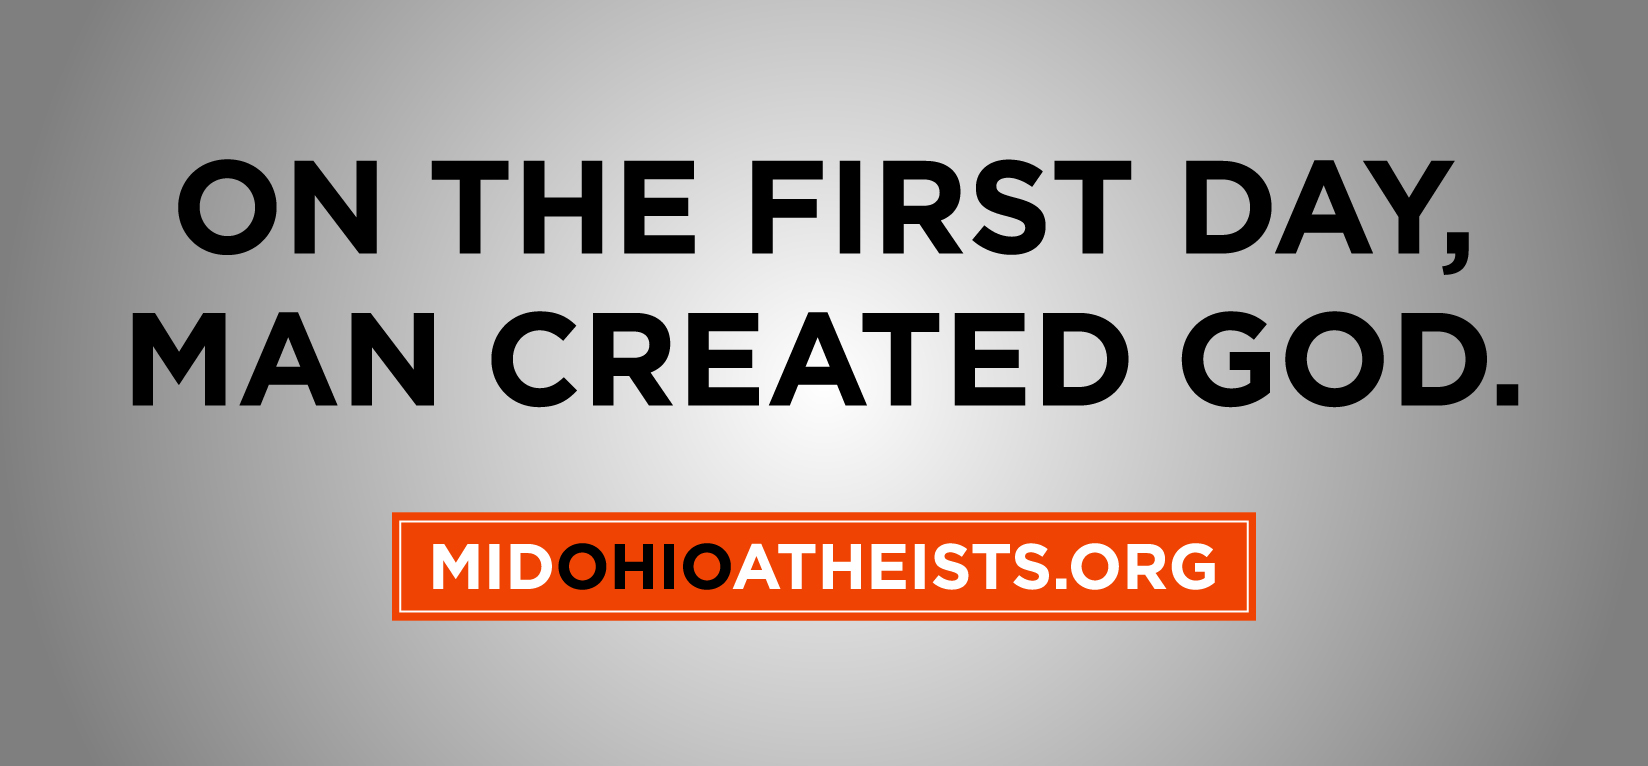 Winning Entries in the Design-Your-Own-Atheist-Billboard Contest Now Up in Ohio